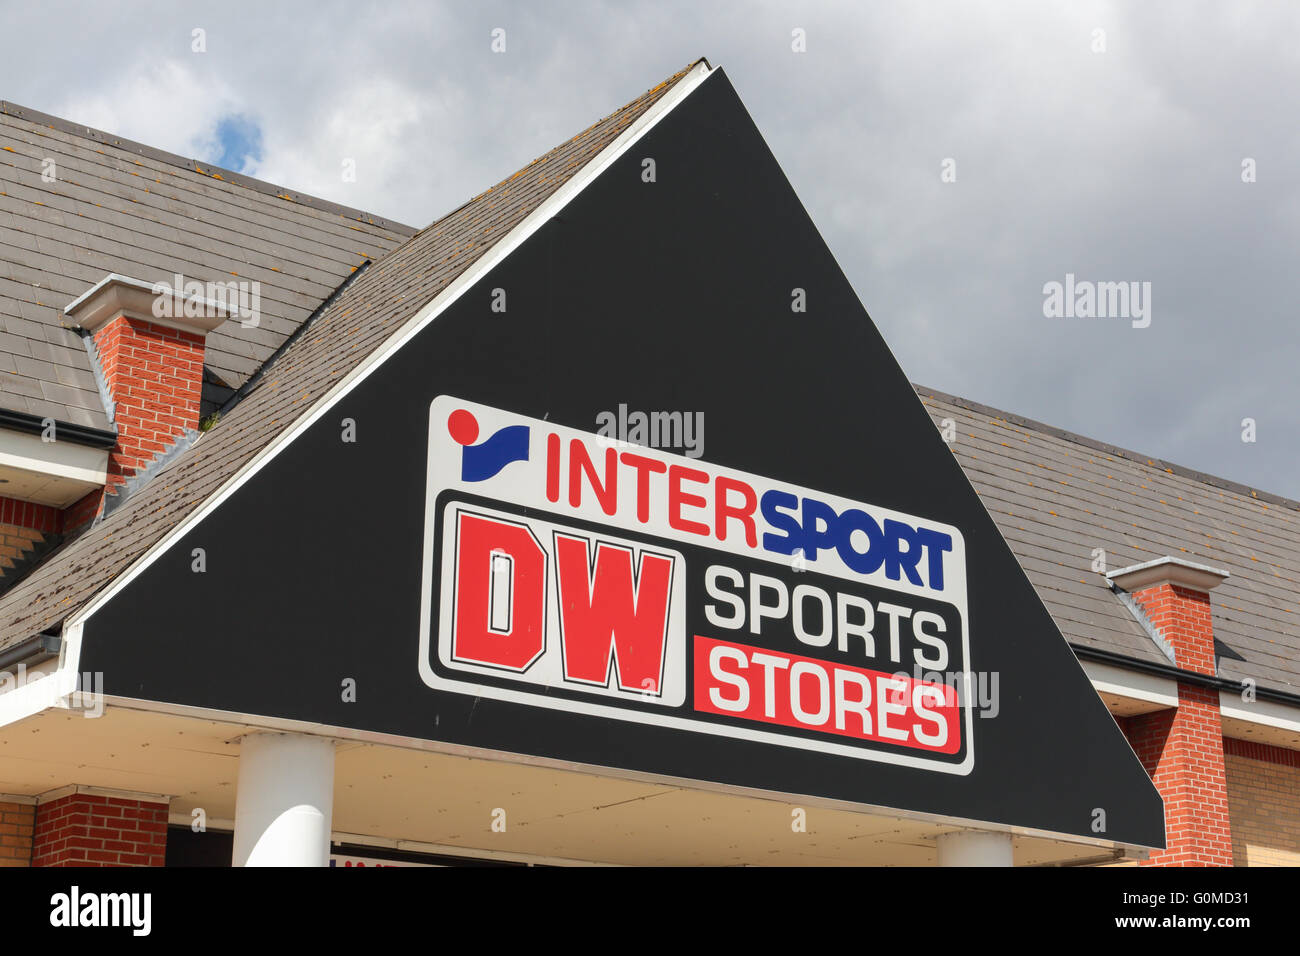 Intersport DW Sports Store sign Stock Photo